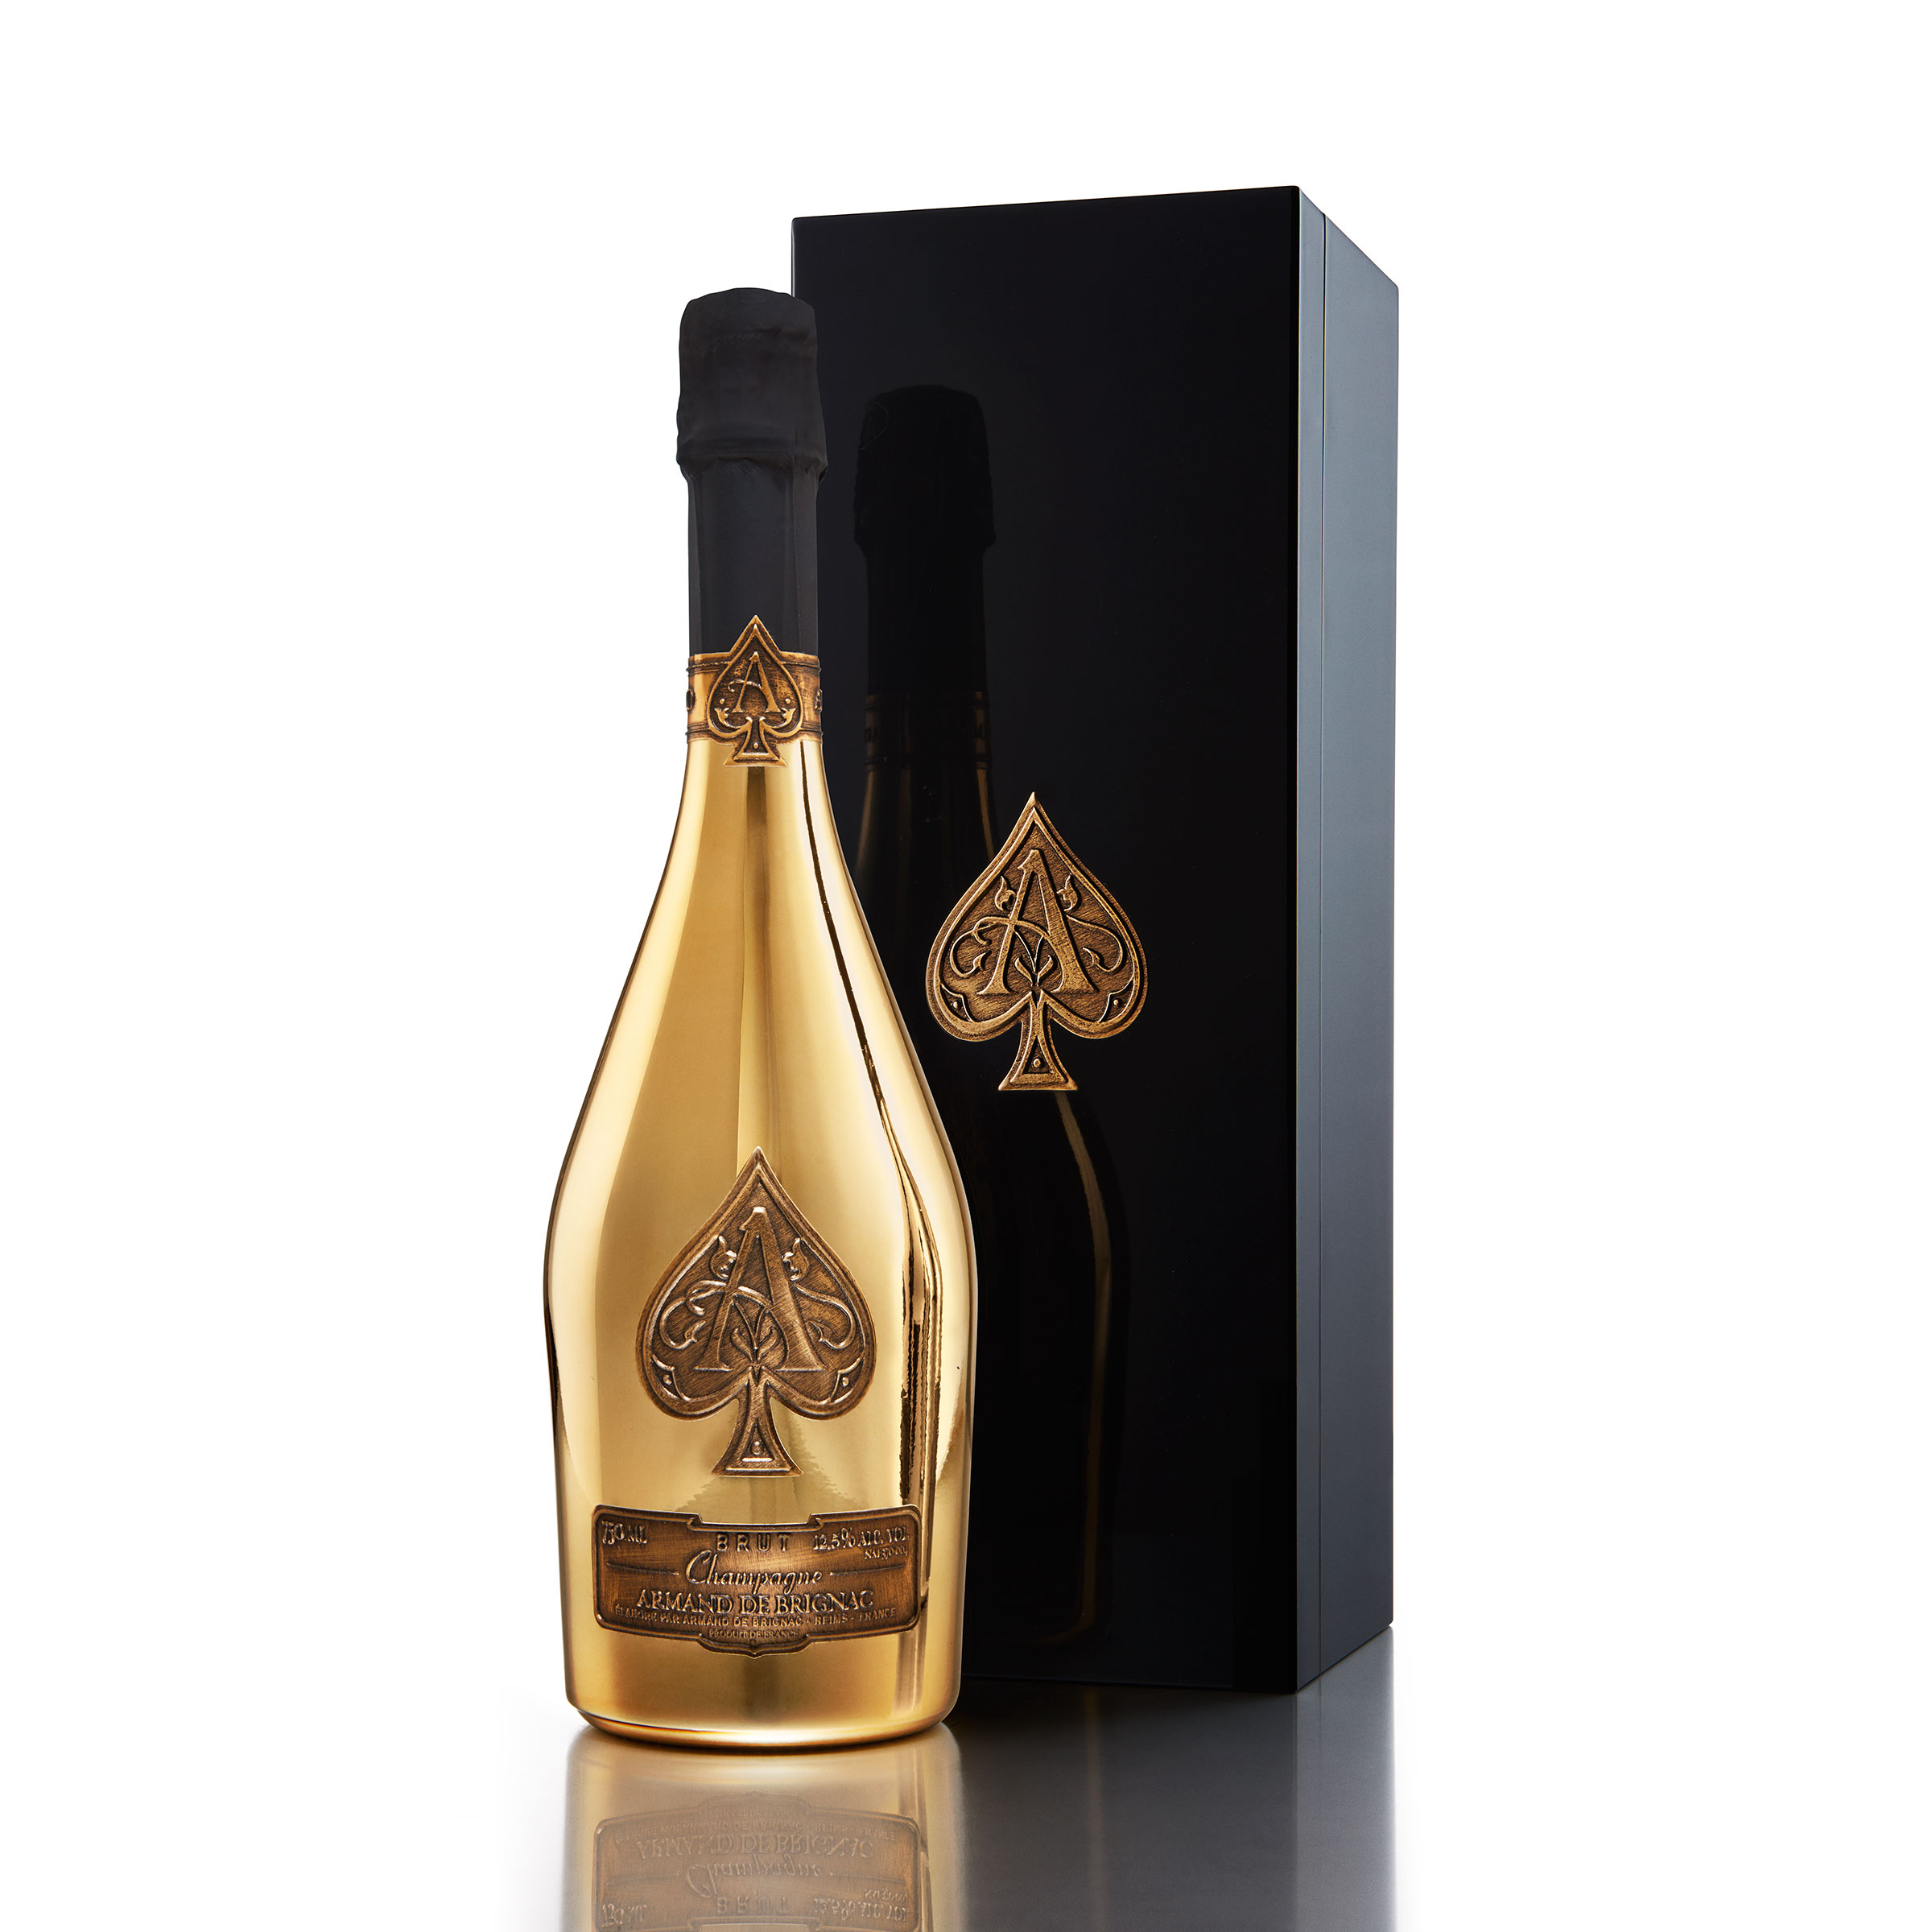 Buy And Send Armand de Brignac Brut Gold NV Champagne 75cl in Branded Box Gift Online